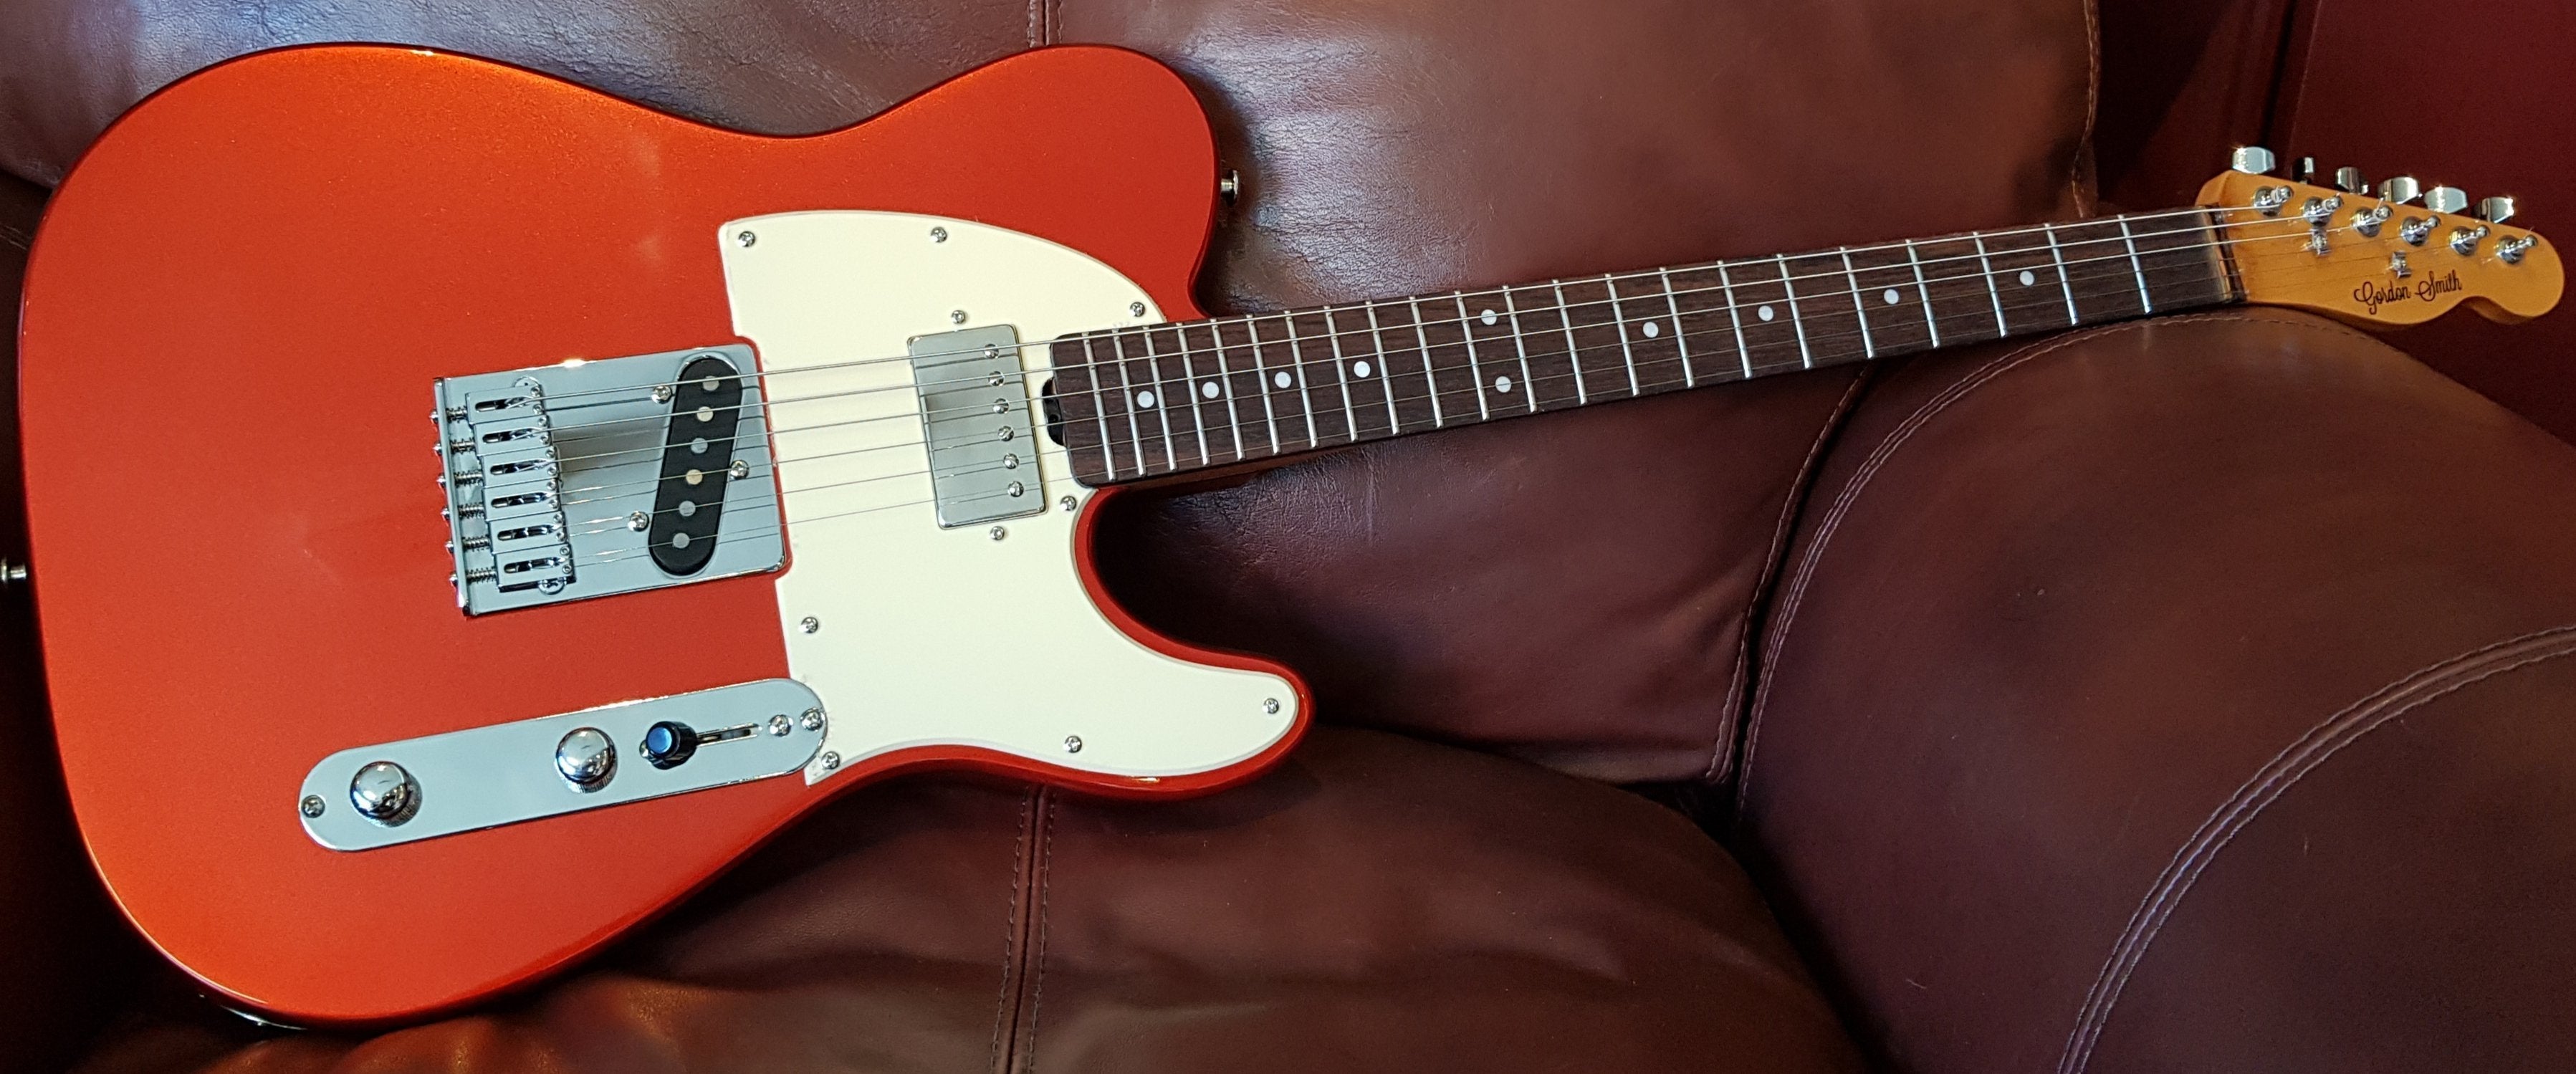 Gordon Smith Classic T HBS Custom Candy Apple Red, Electric Guitar for sale at Richards Guitars.